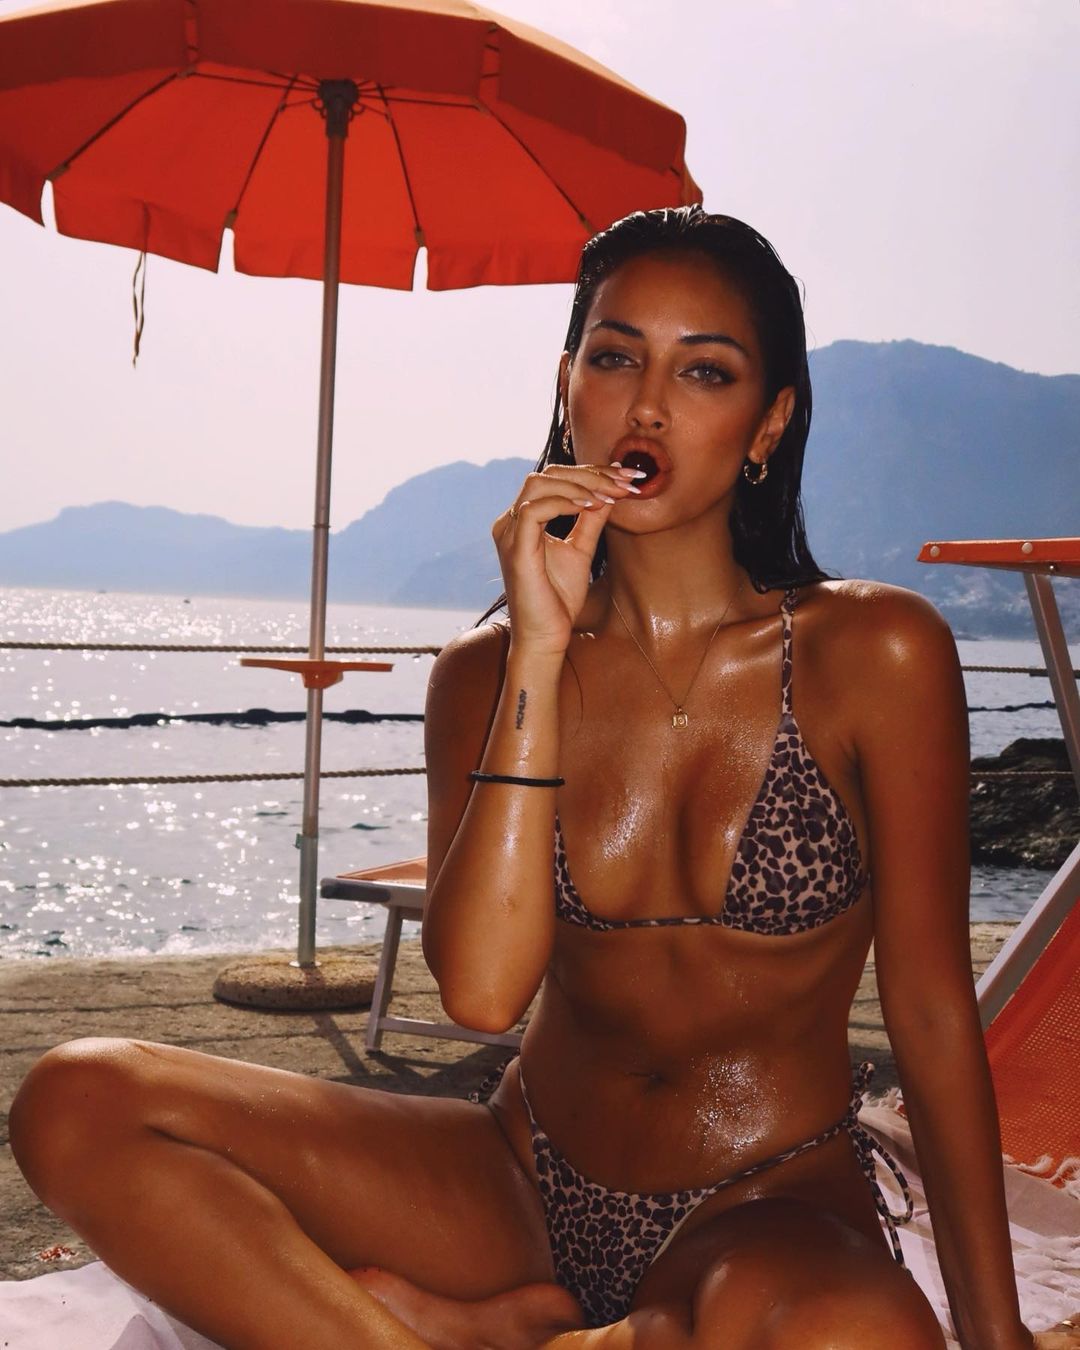 Wolfiecindy Cindy Kimberly Photos Set and Video